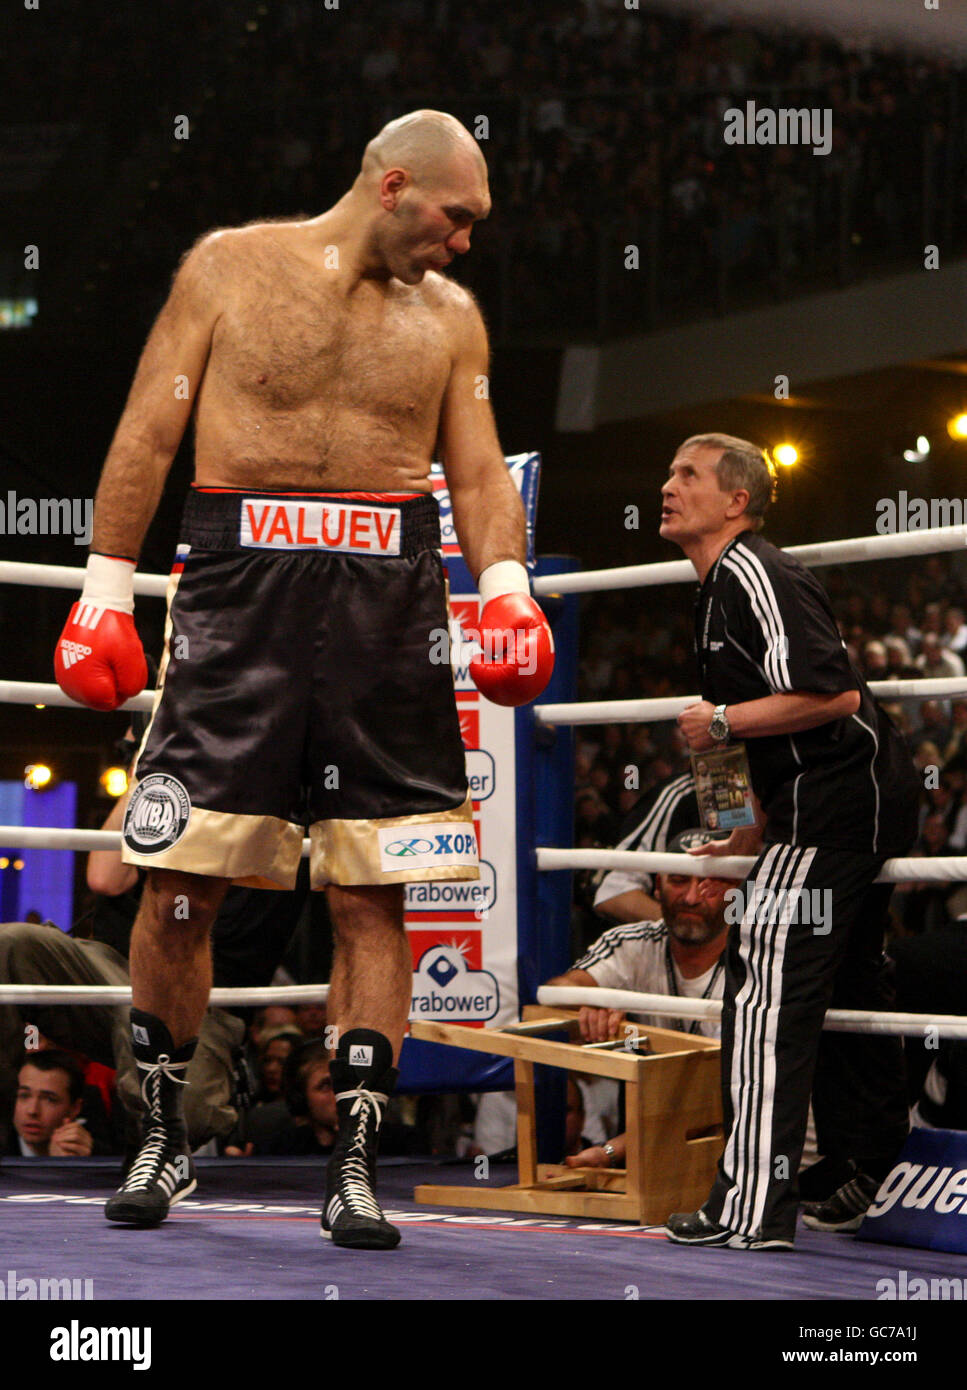 Russia's Nikolai Valuev talks to his trainer as he gets up from his corner of ring at the Nuremberg Arena, Germany Stock Photo